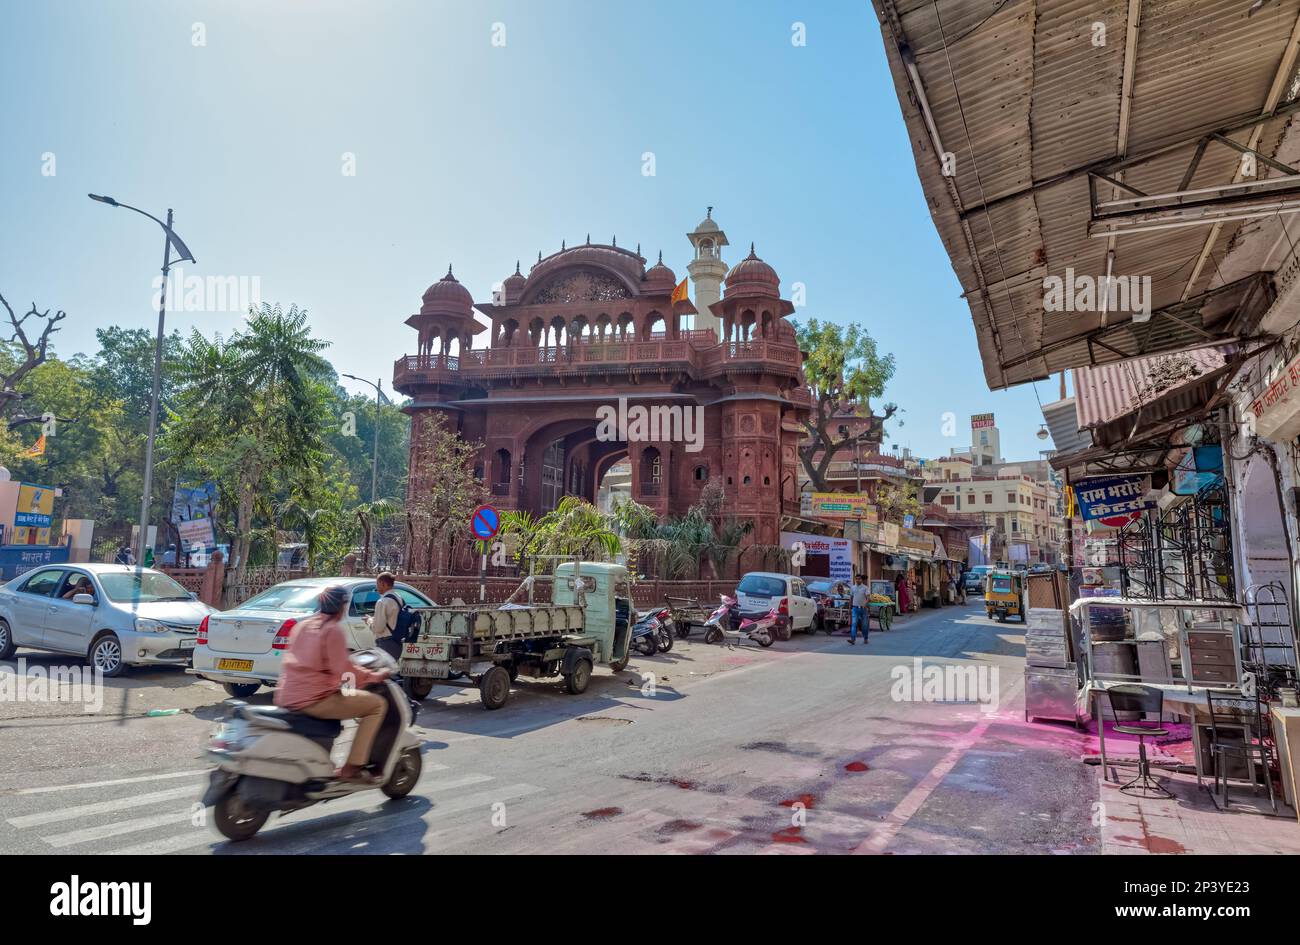 Old building at Mahaveer circle in Ajmer India Stock Photo